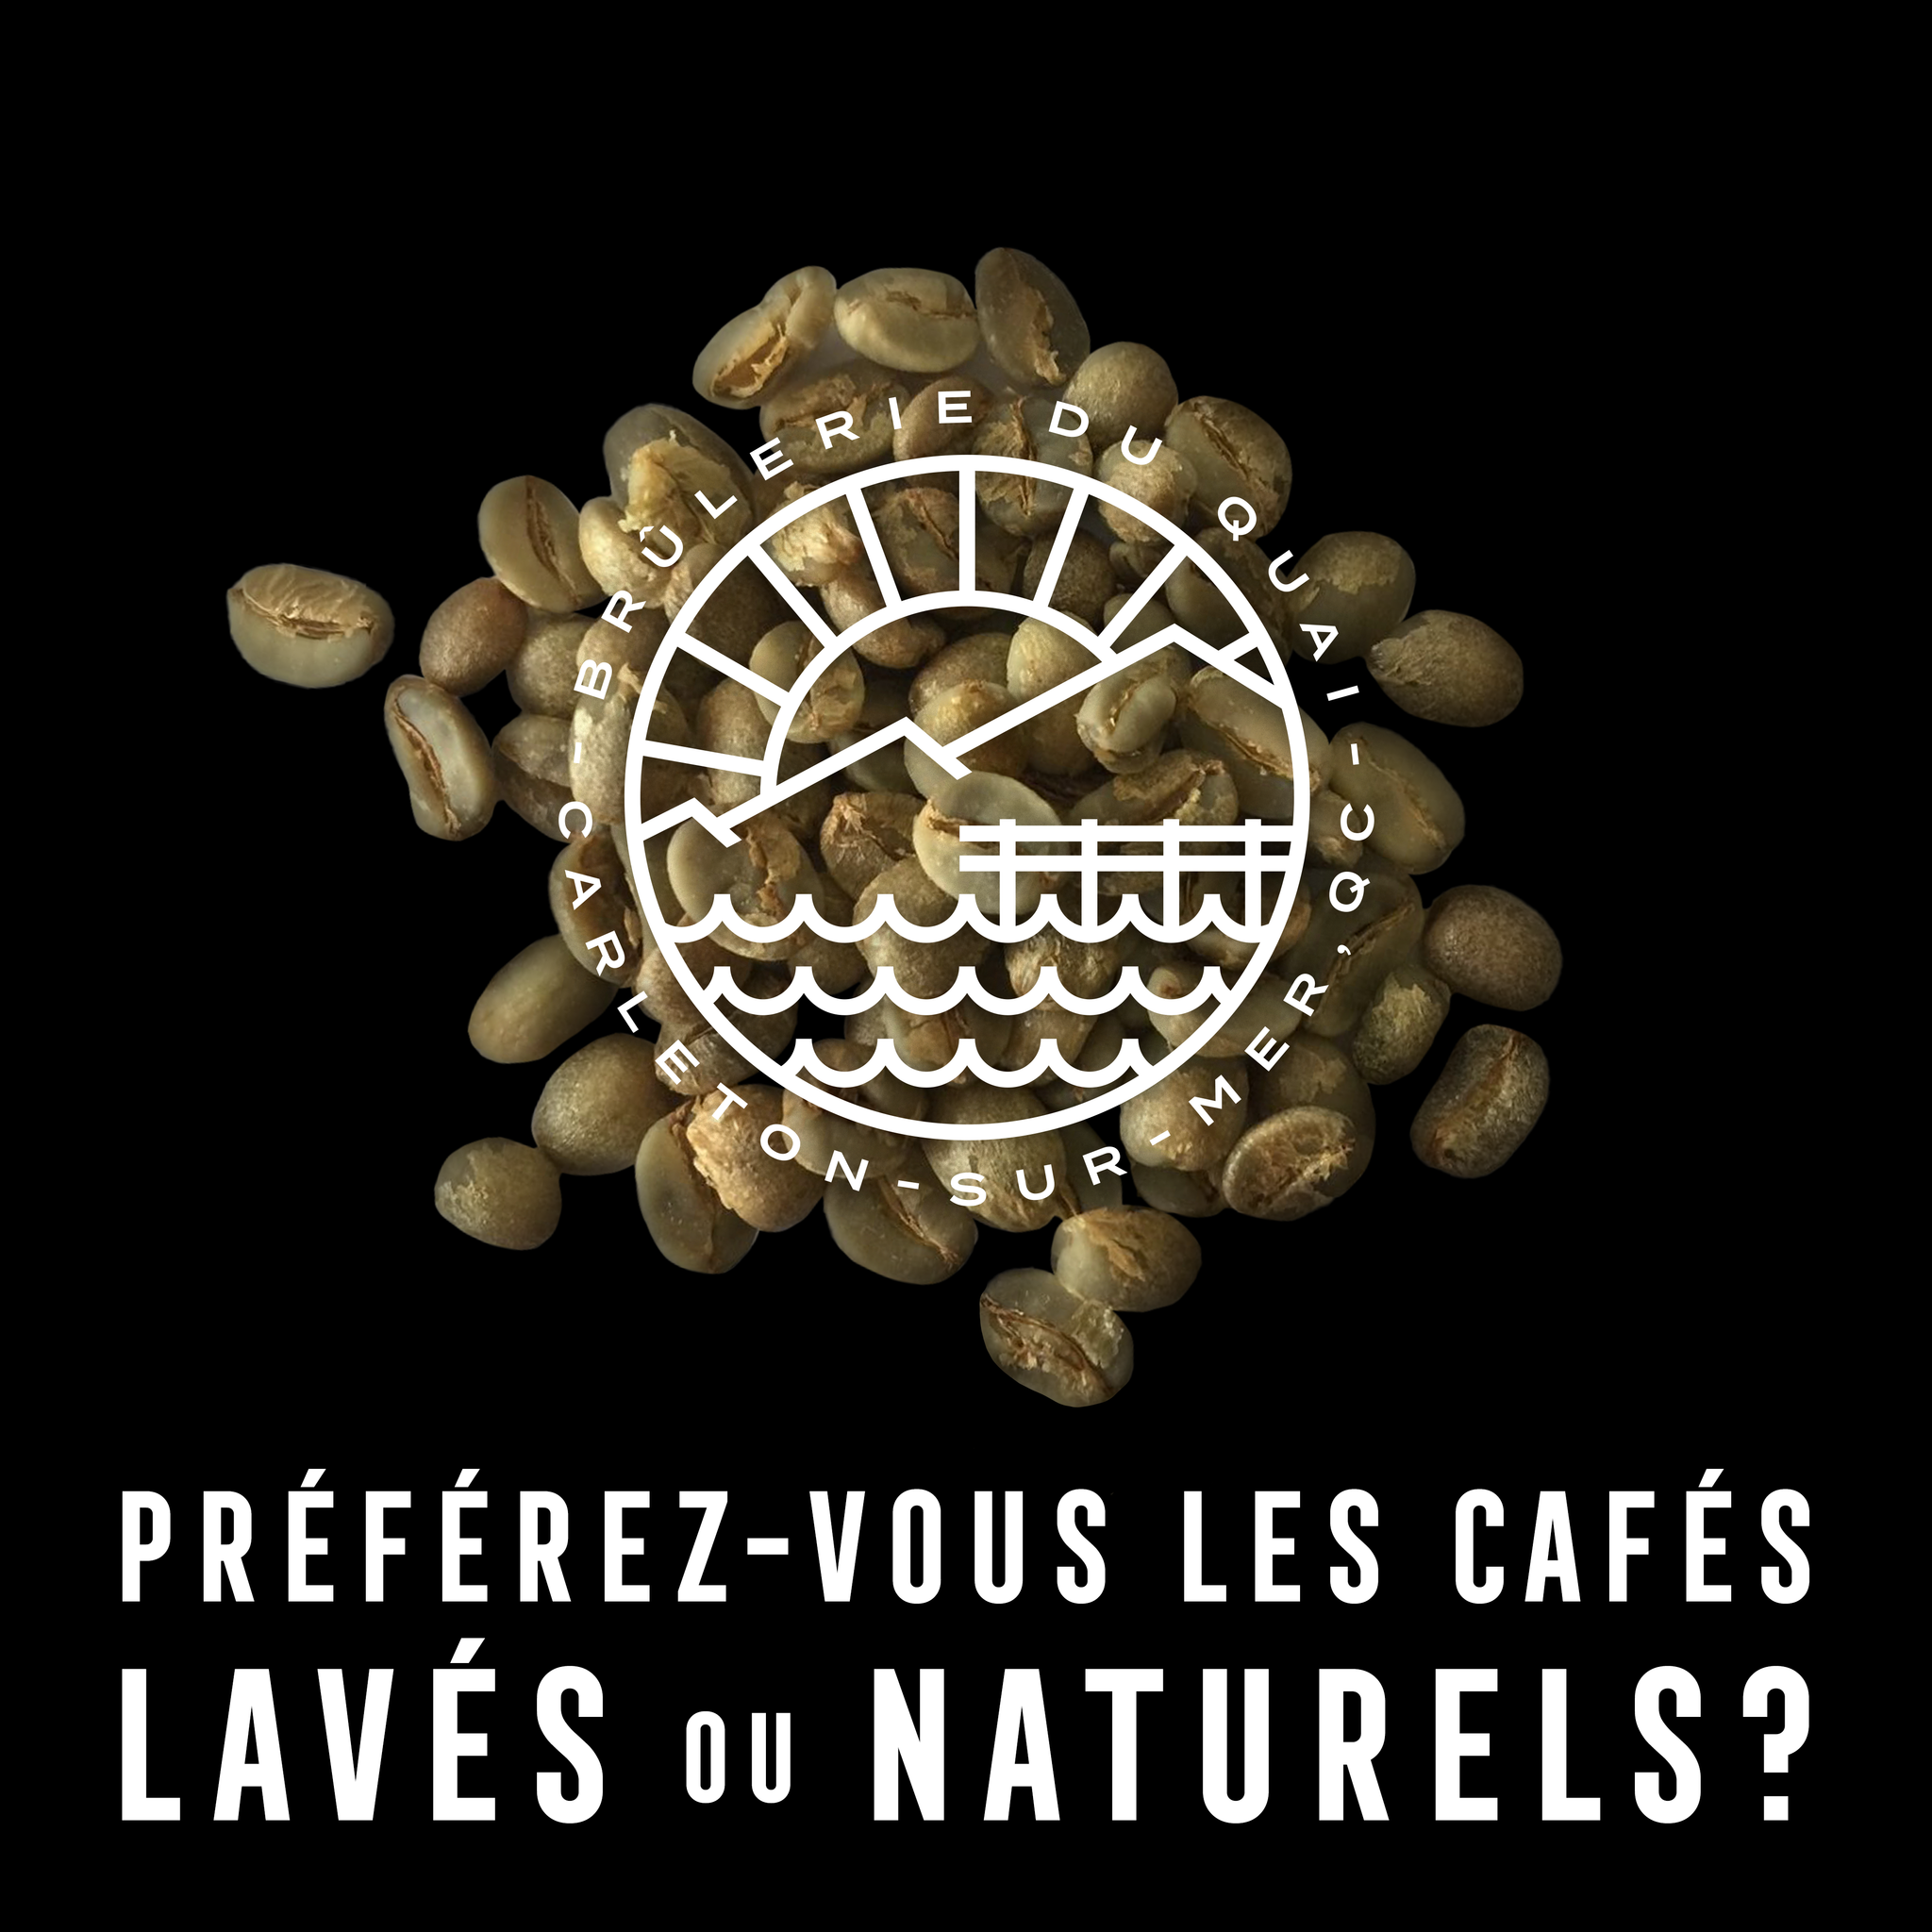 Do you prefer washed or natural coffees? 